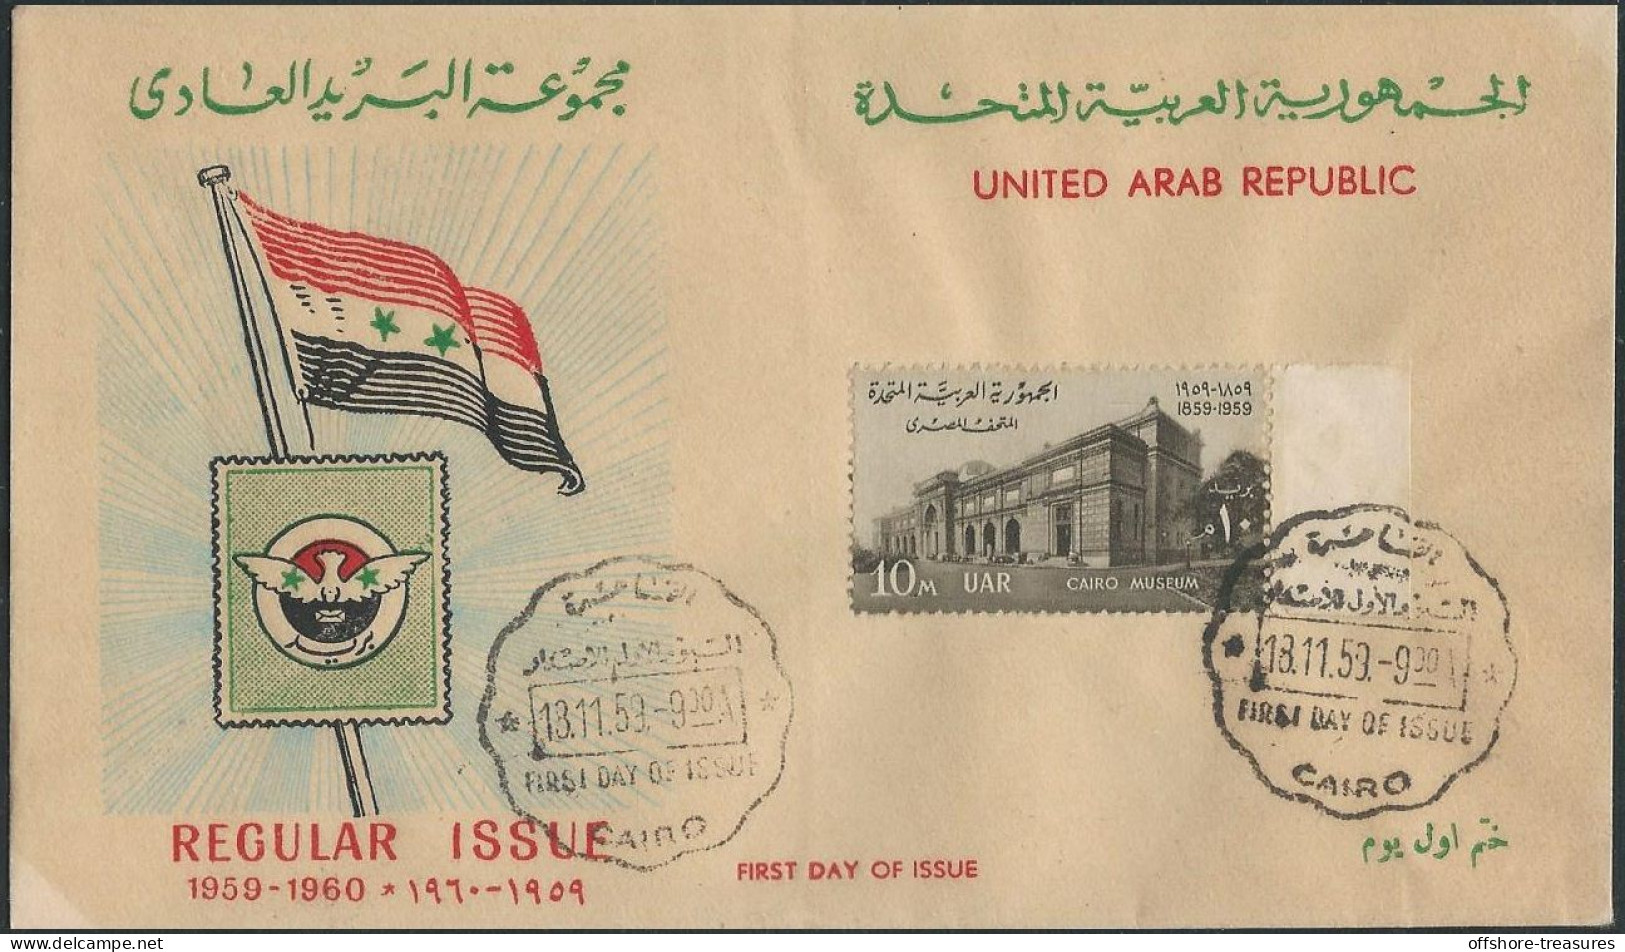 Egypt UAR 1959 - 1960 First Day Cover 100 Years Anniversary Egyptian Museum 1859-1959 On Regular Issue FDC - Covers & Documents